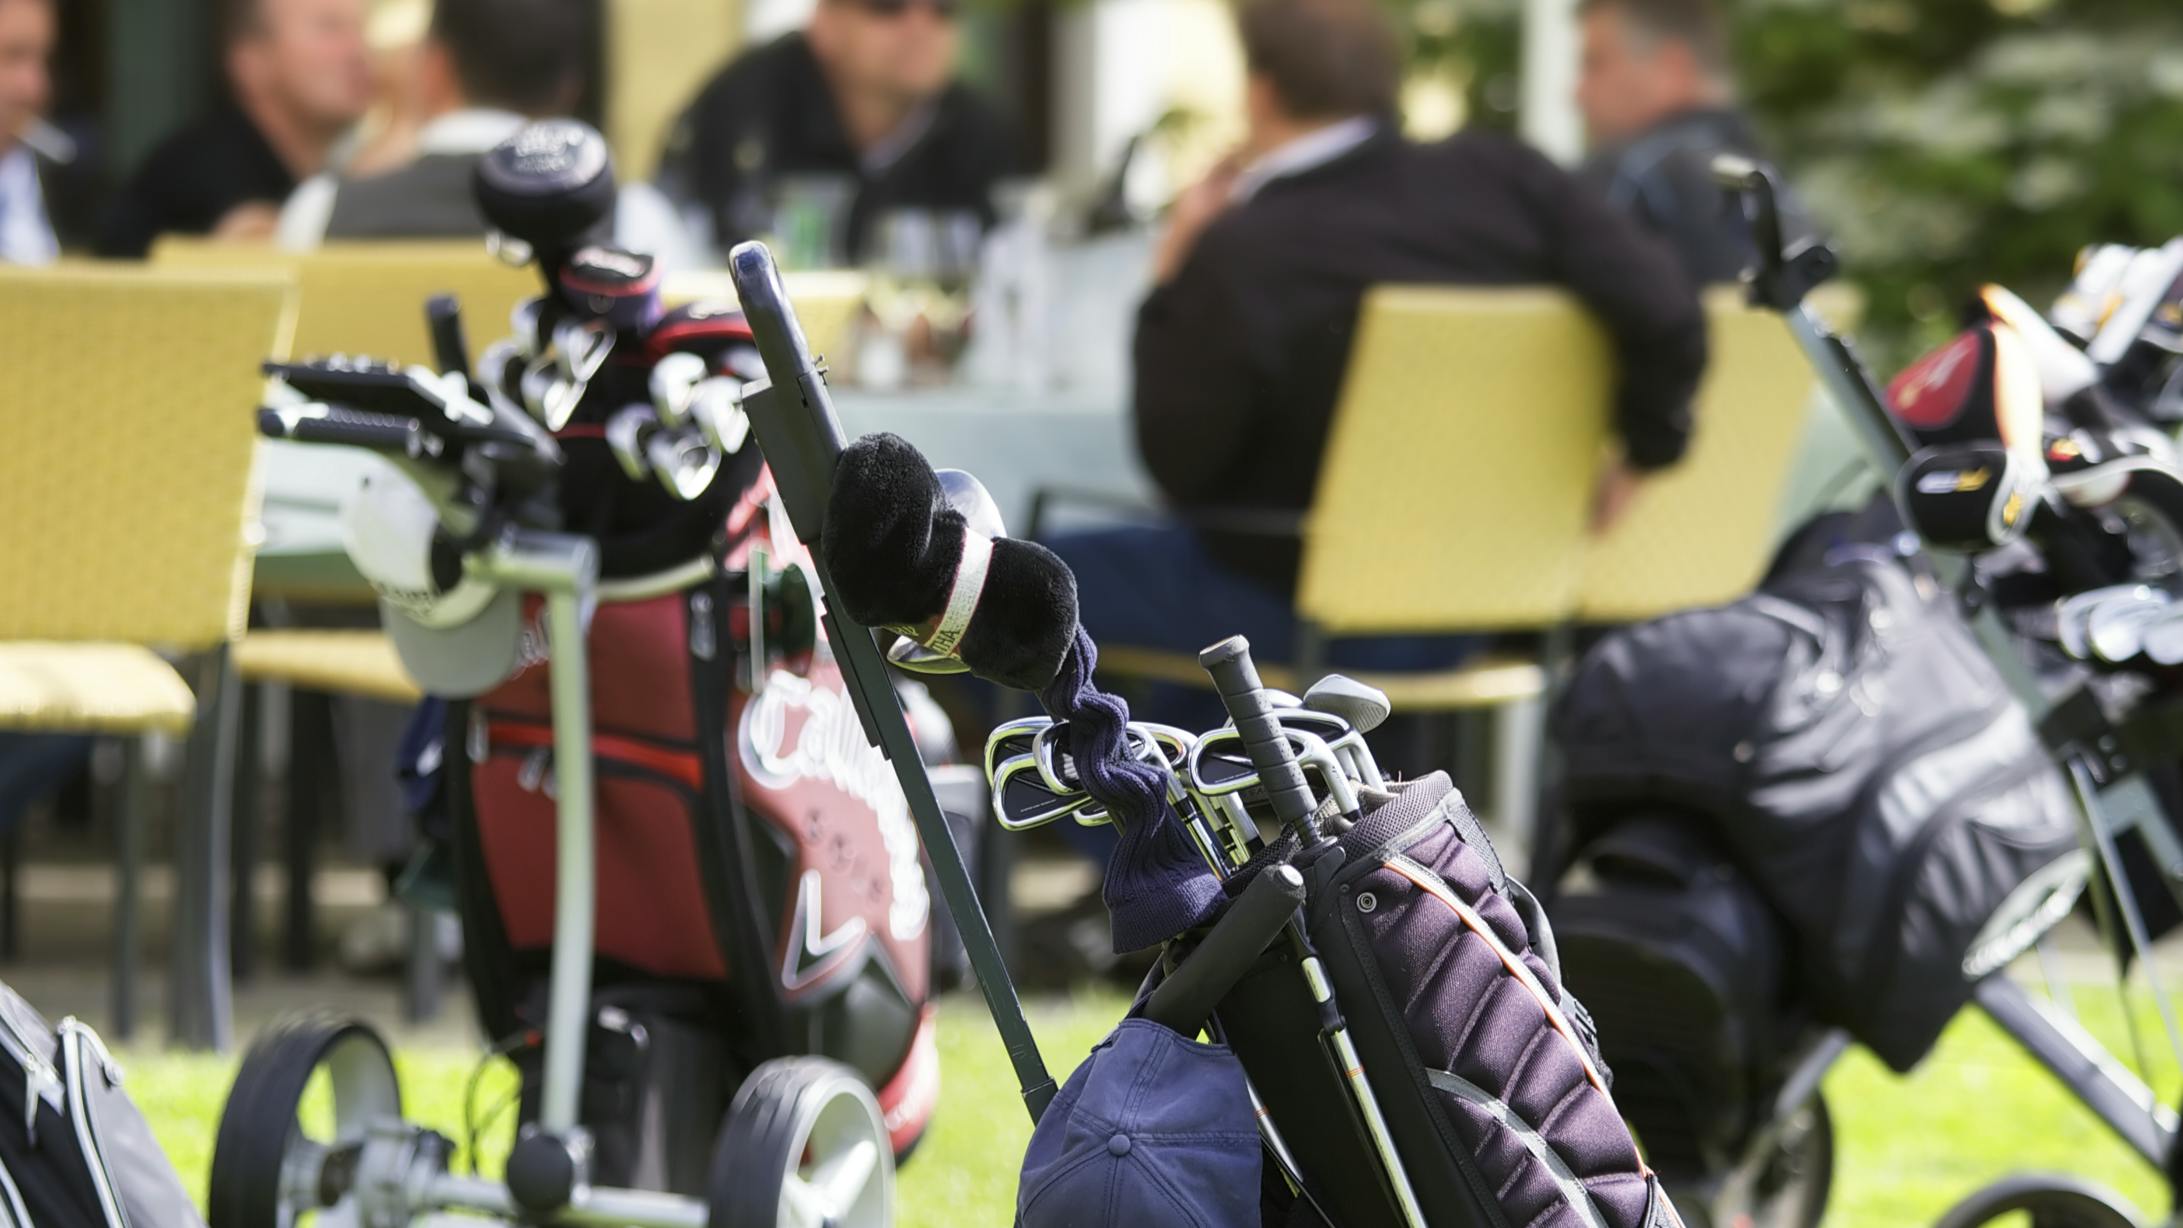 Several golf bags sit together, most of the golf drivers have headcovers on them. 